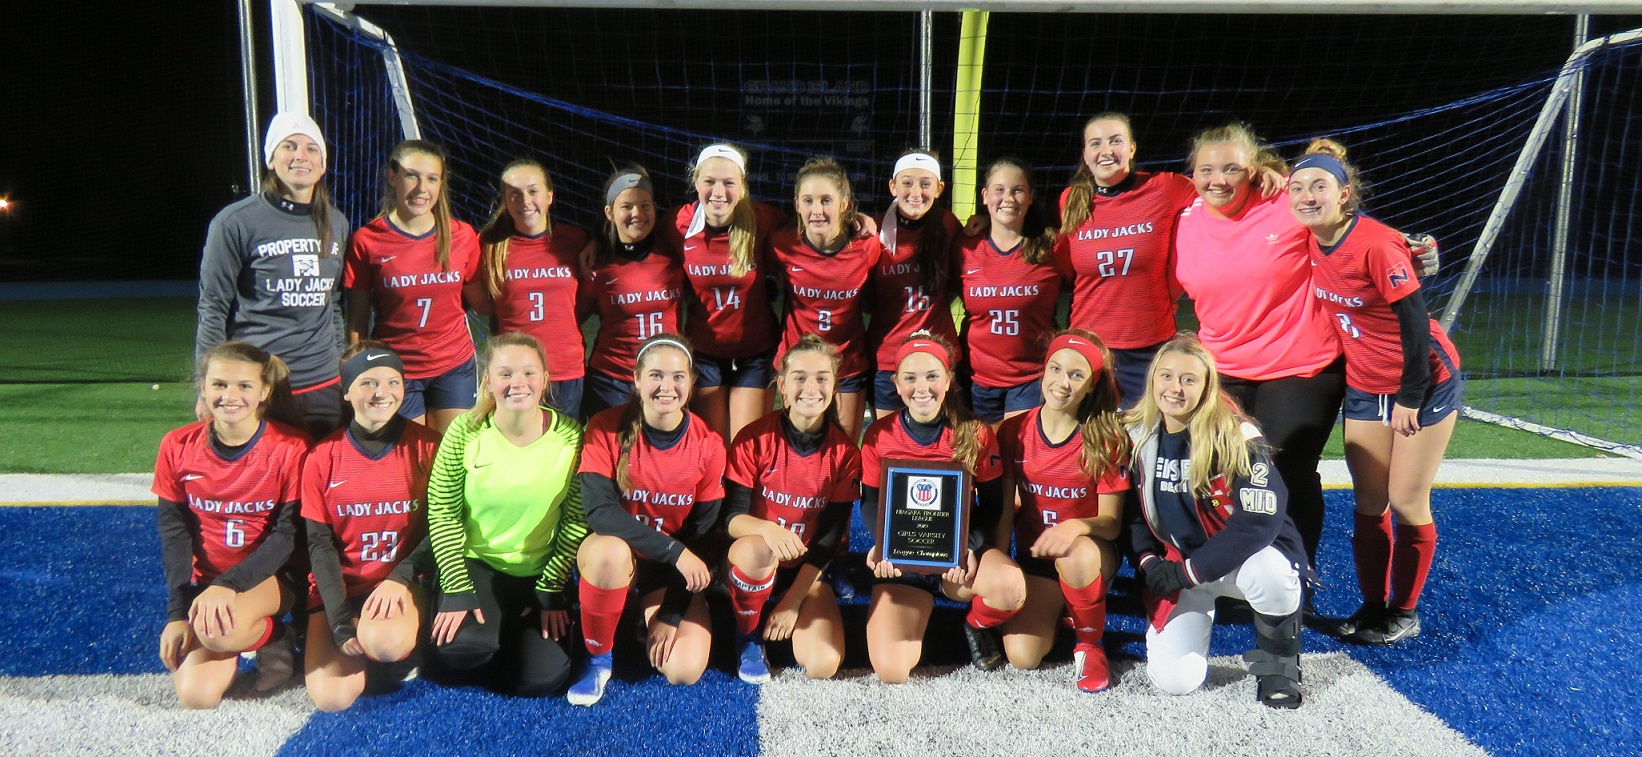 The North Tonawanda girls soccer team poses with the Niagara Frontier League plaque following Wednesday night's victory over Grand Island. The title is the team's first since 1985. (Photo by David Yarger)